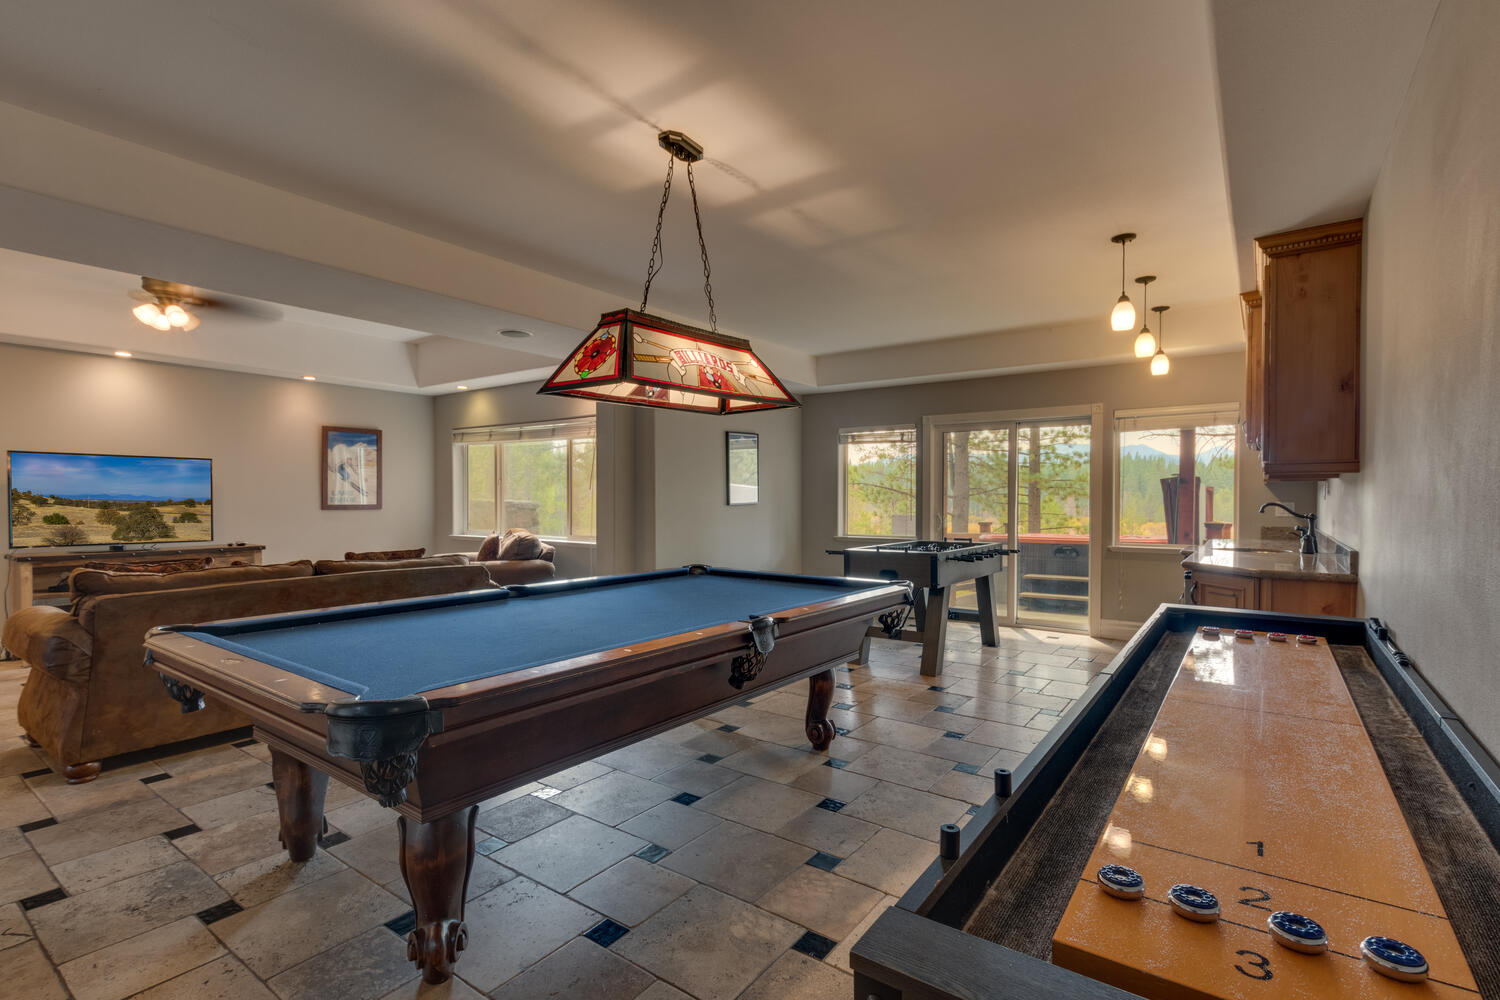 Living room with pool table and shuffle board